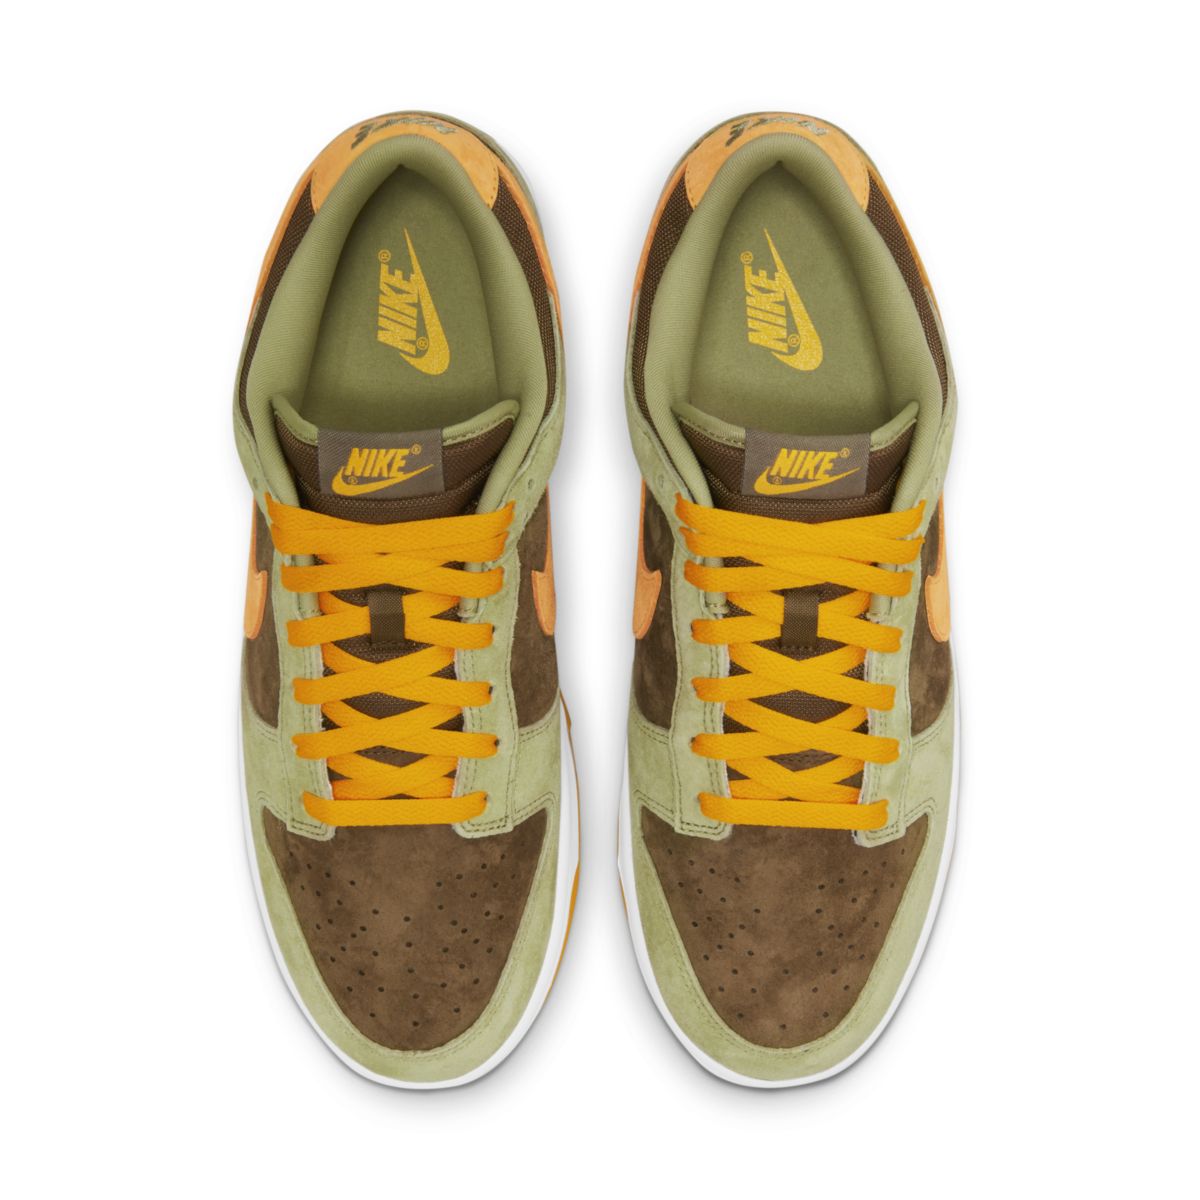 NIKE DUNK LOW DUSTY OLIVE DH5360-300